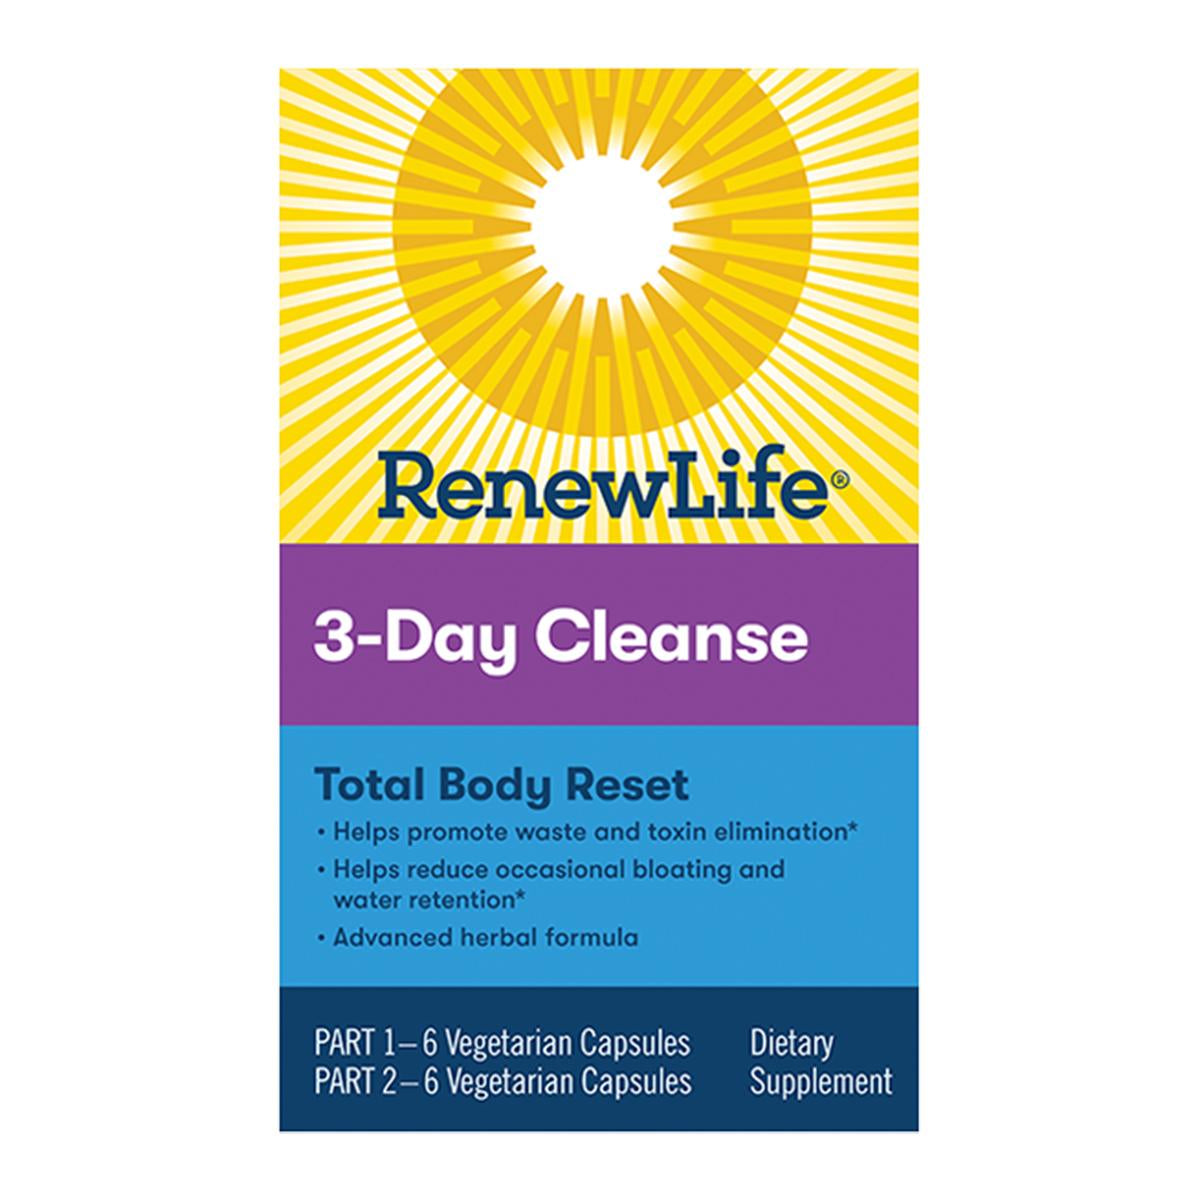 Primary image of 3-Day Cleanse